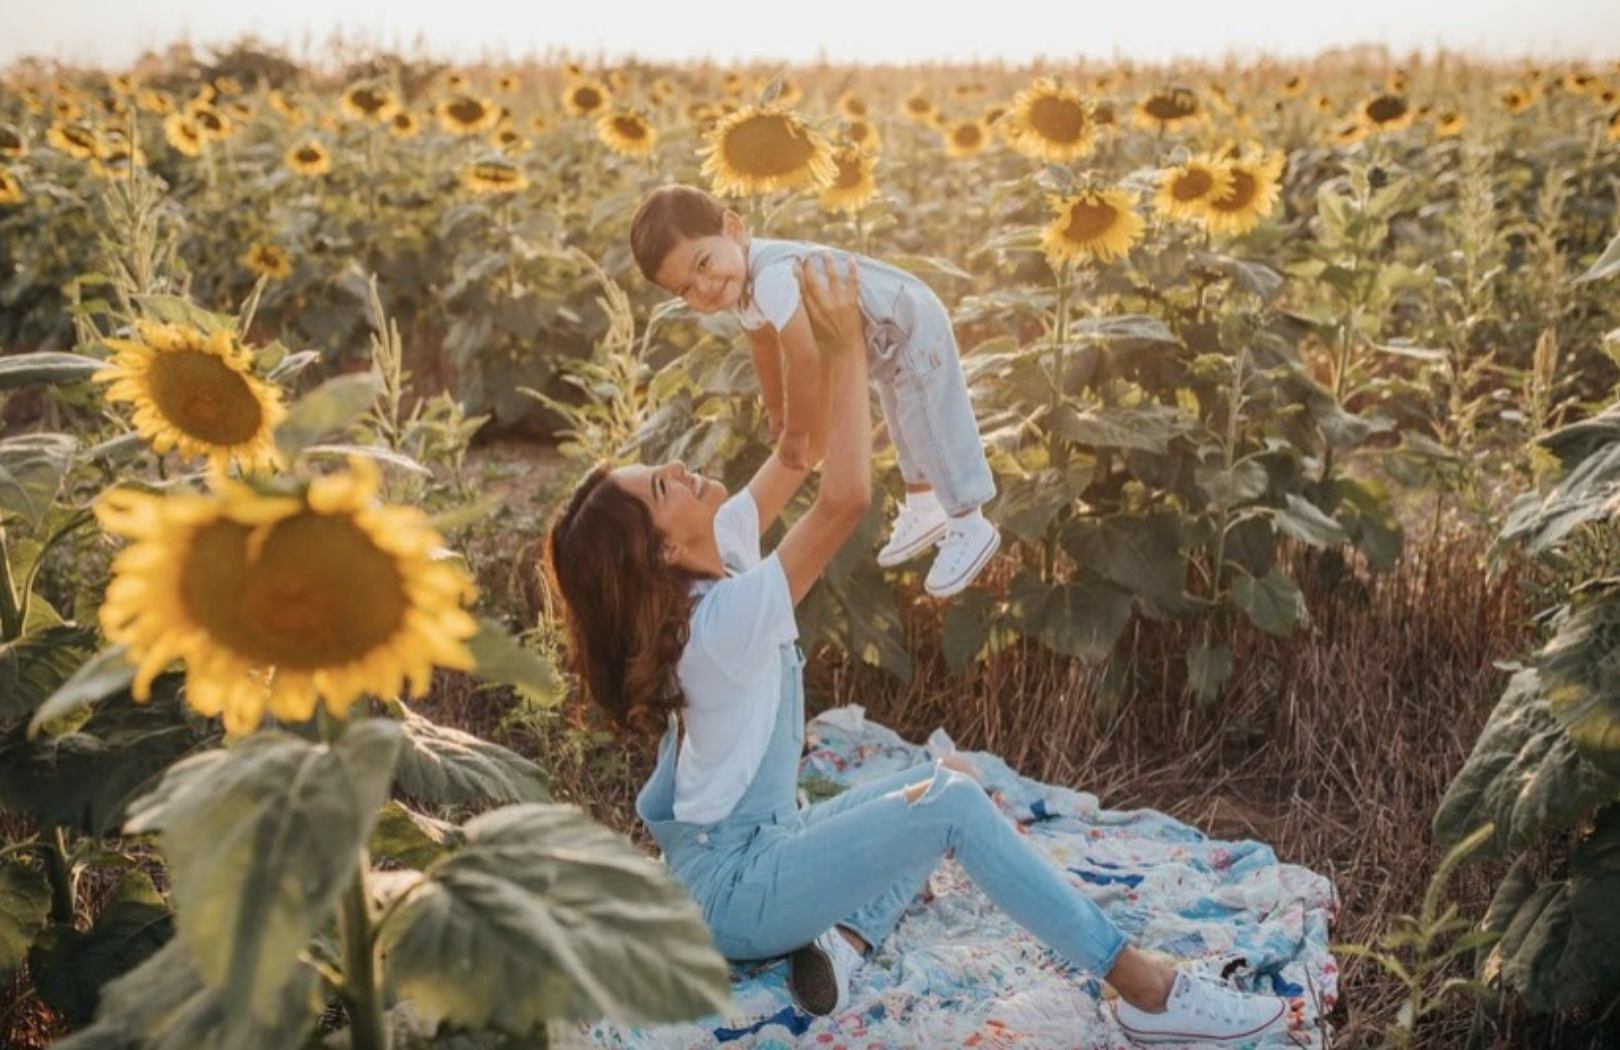 Nydia holding up her son in a sunflower field